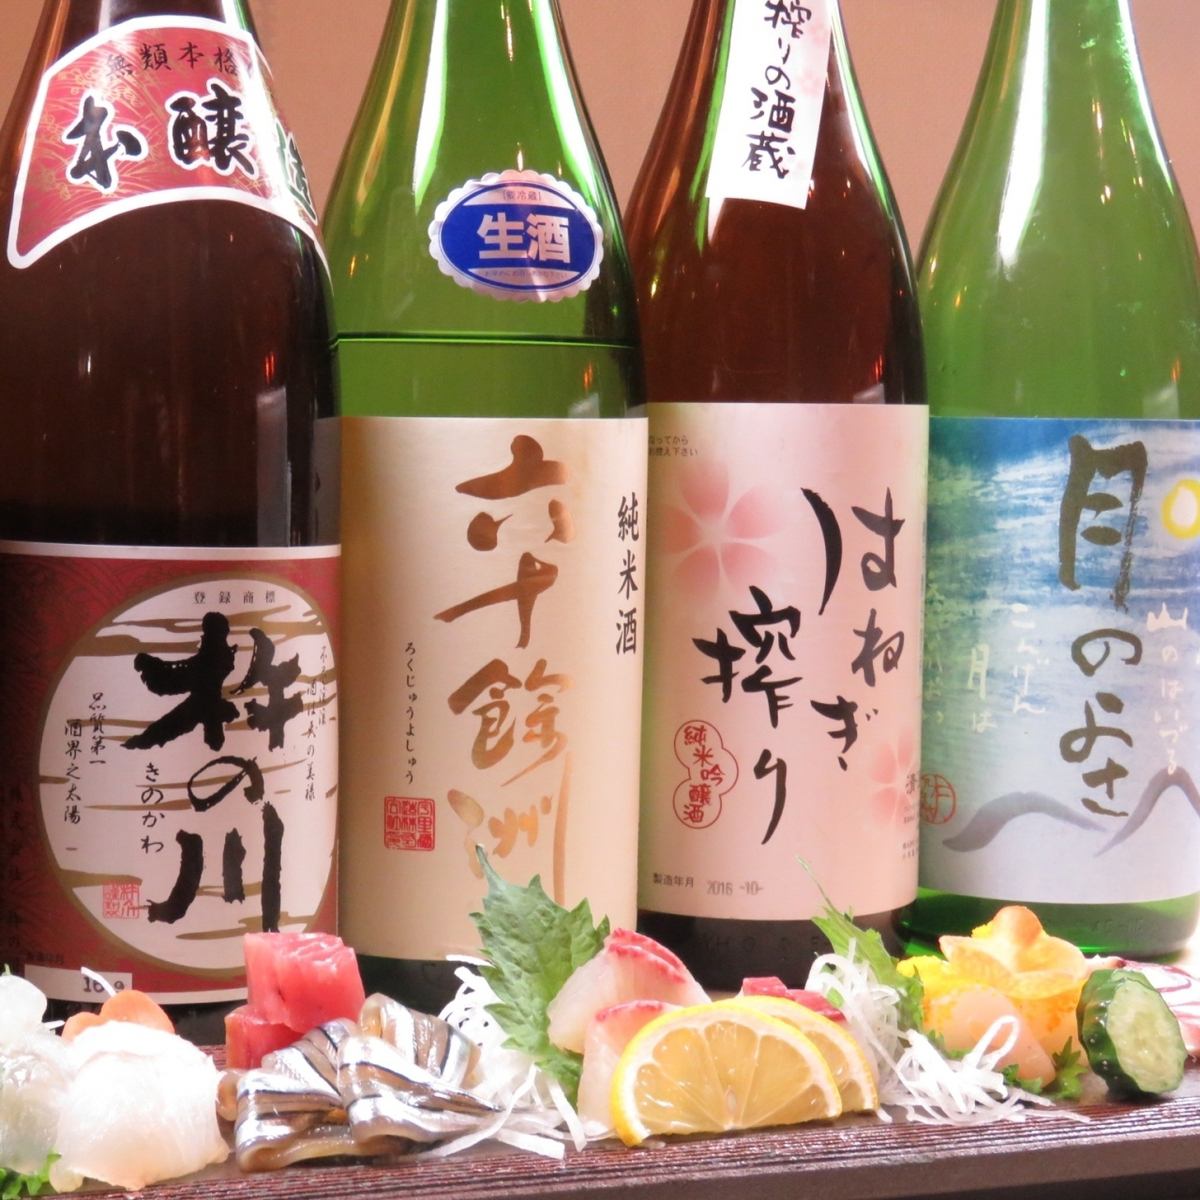 We serve fresh seafood and local sake, and are also recommended for sightseeing!